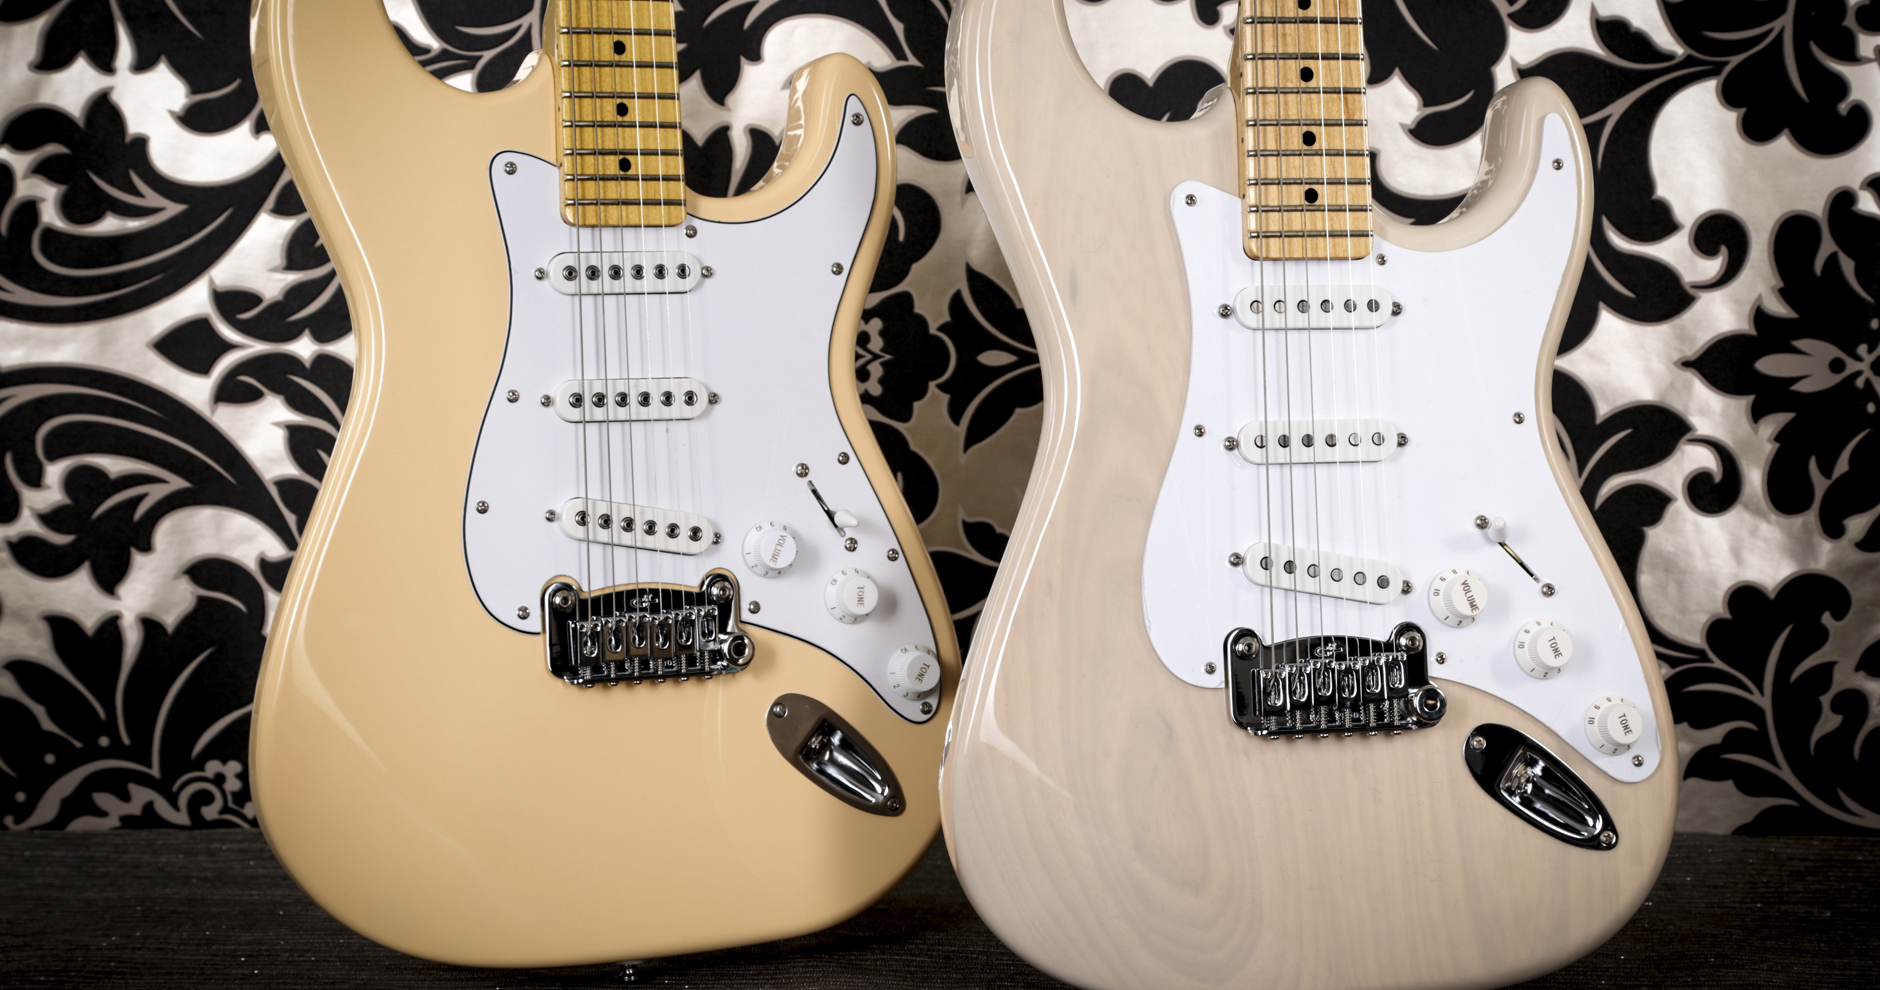 G&L Legacy vs. S-500 - What Are Their Differences? - Andertons Blog